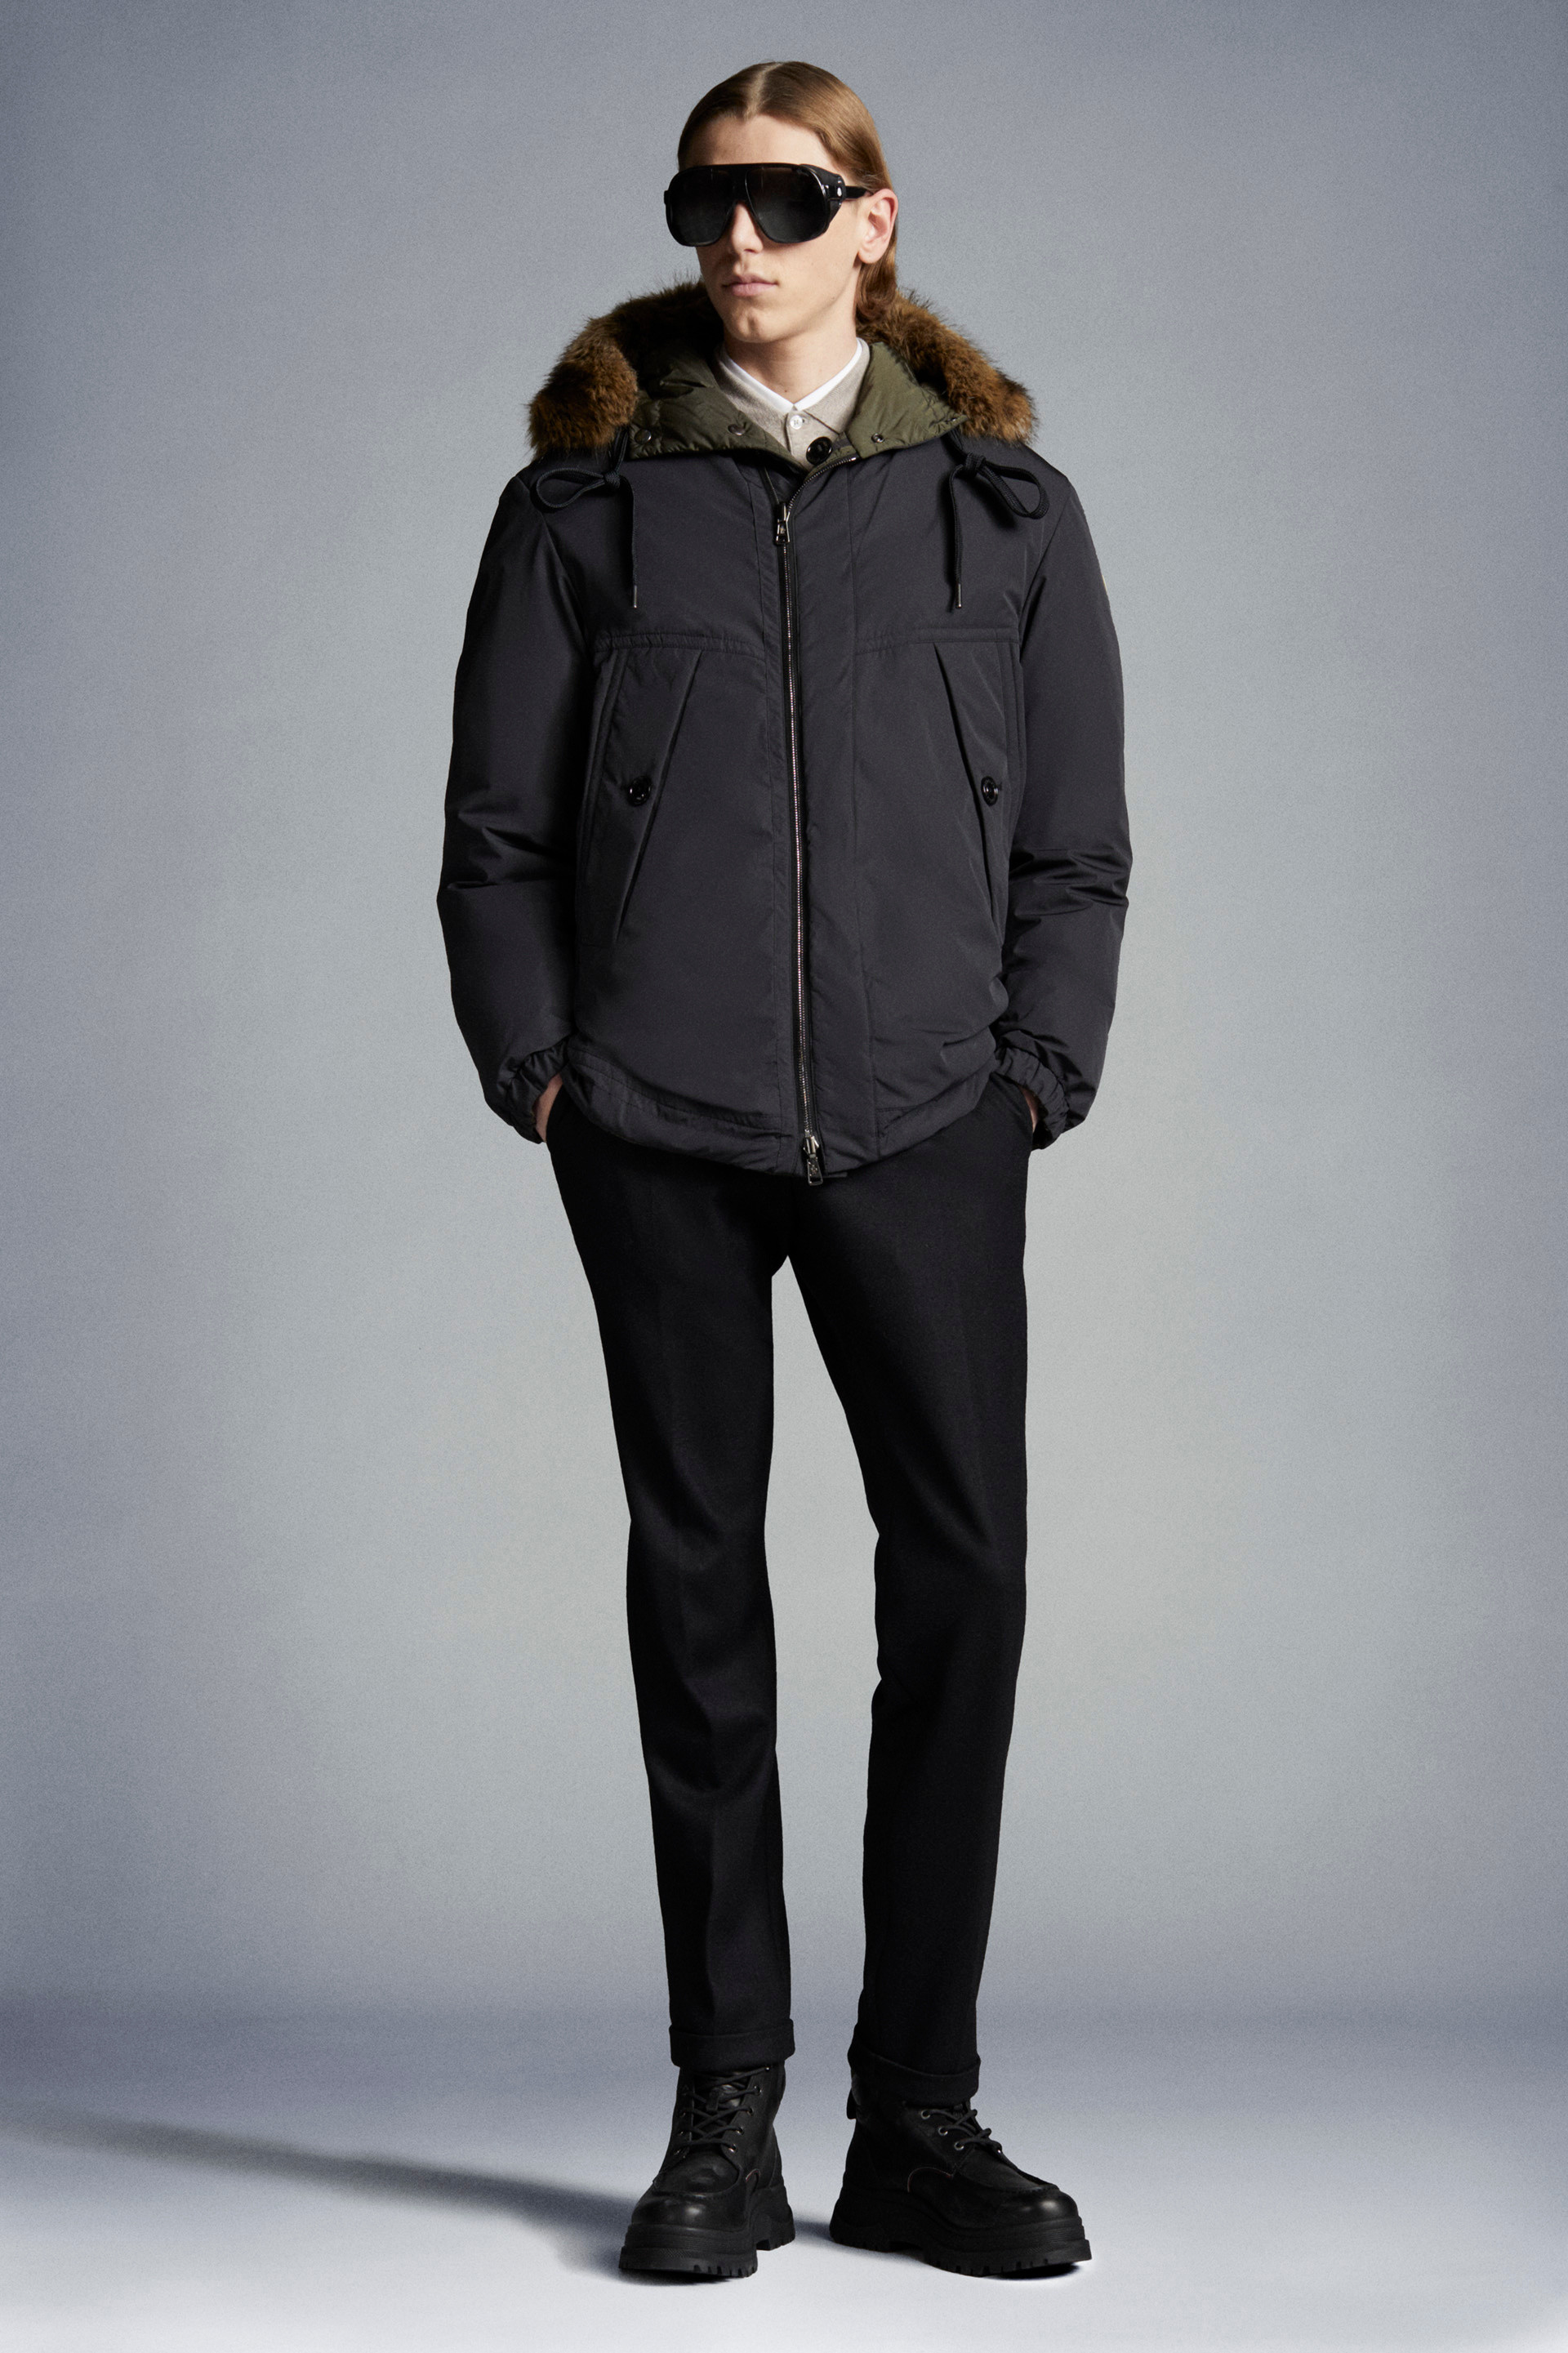 Long Down Jackets for Men - Outerwear | Moncler SK